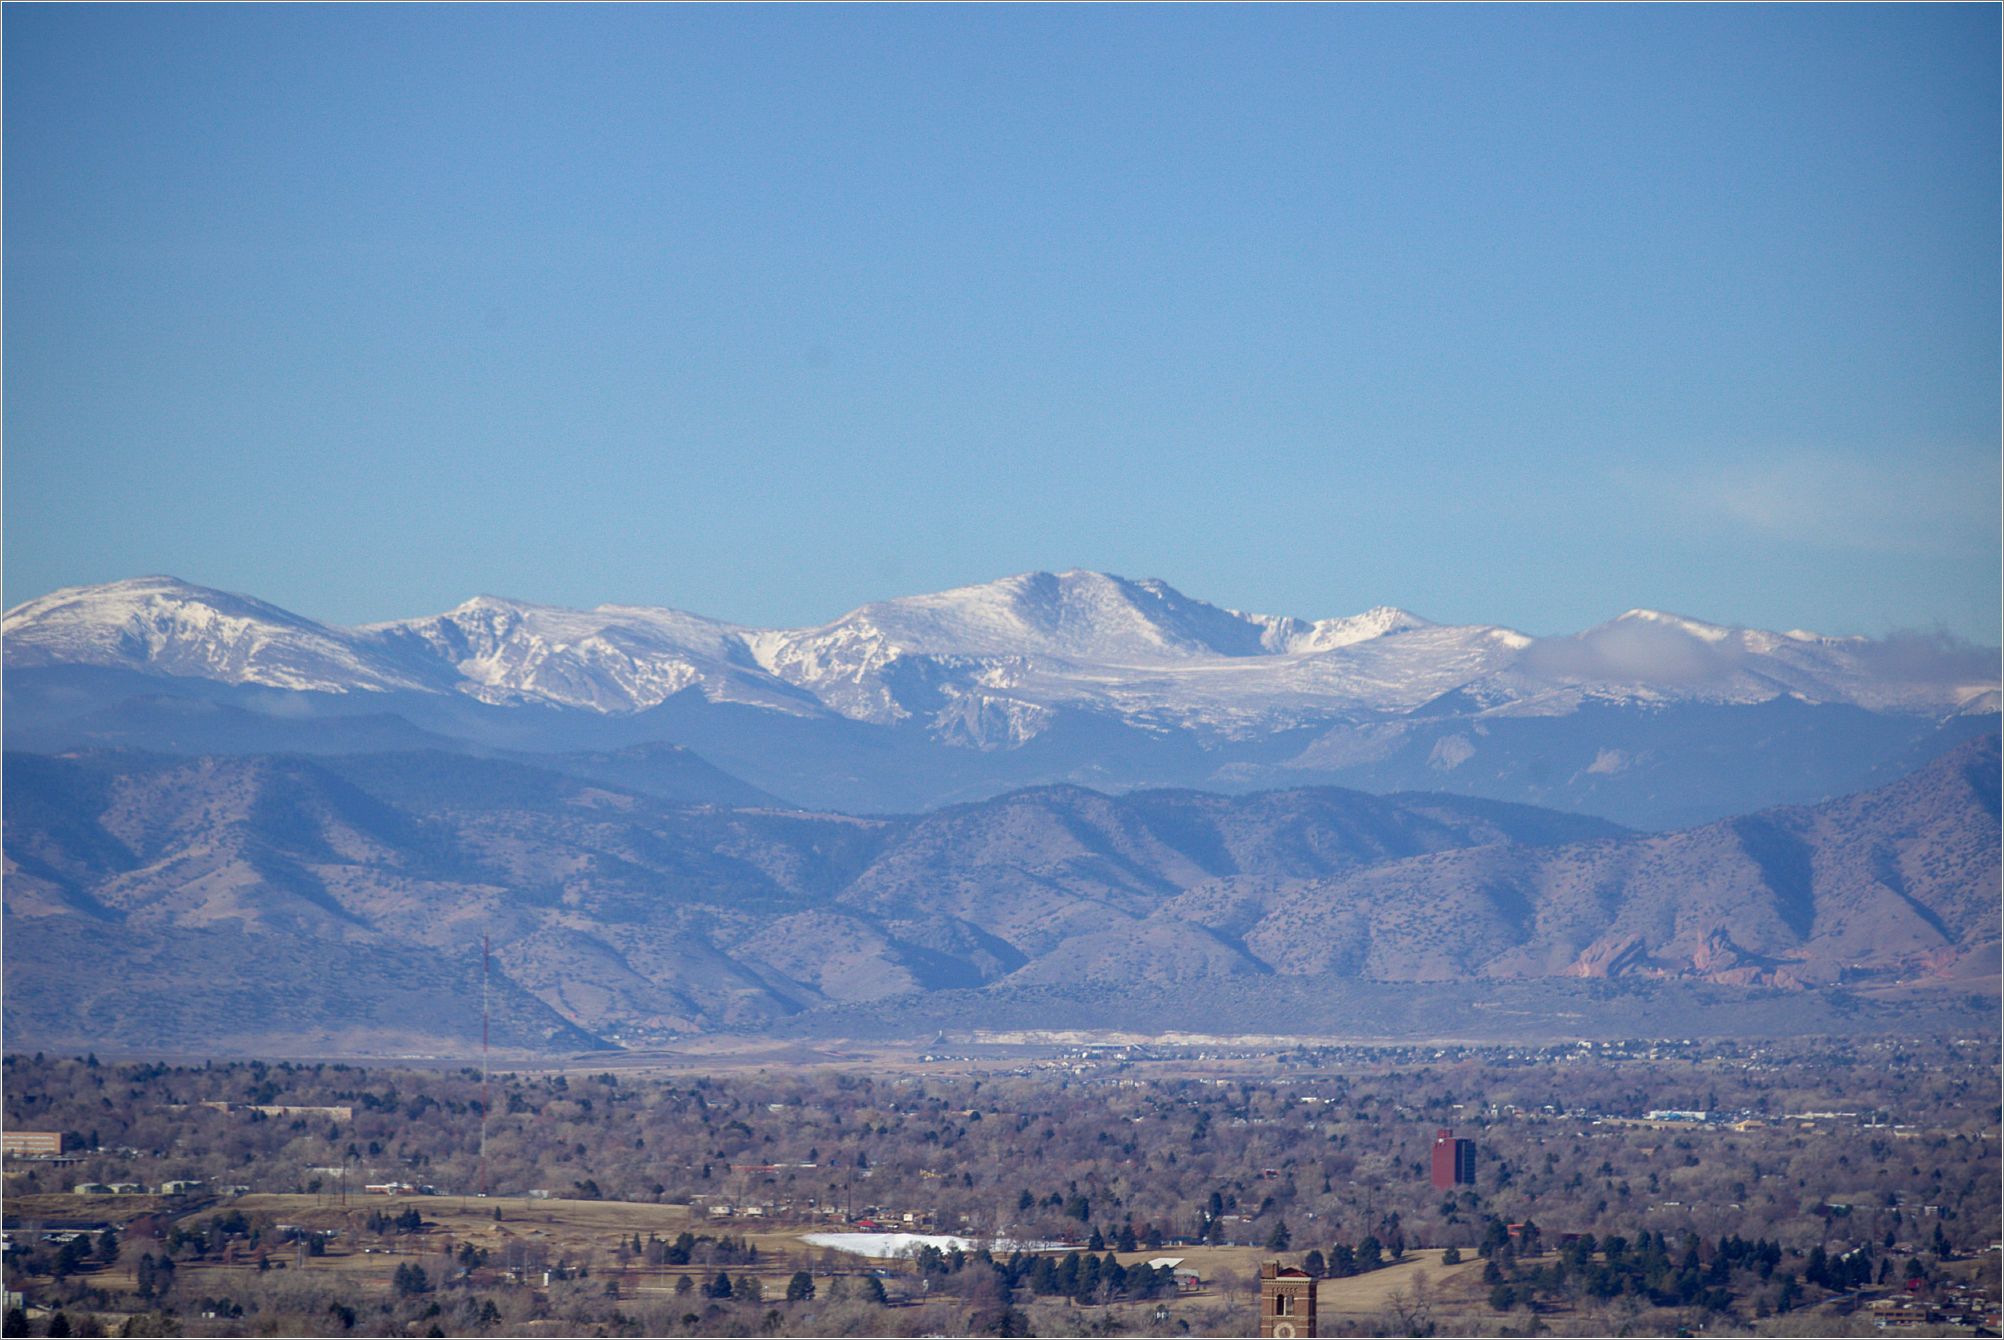 Office View of Mt. Evans 